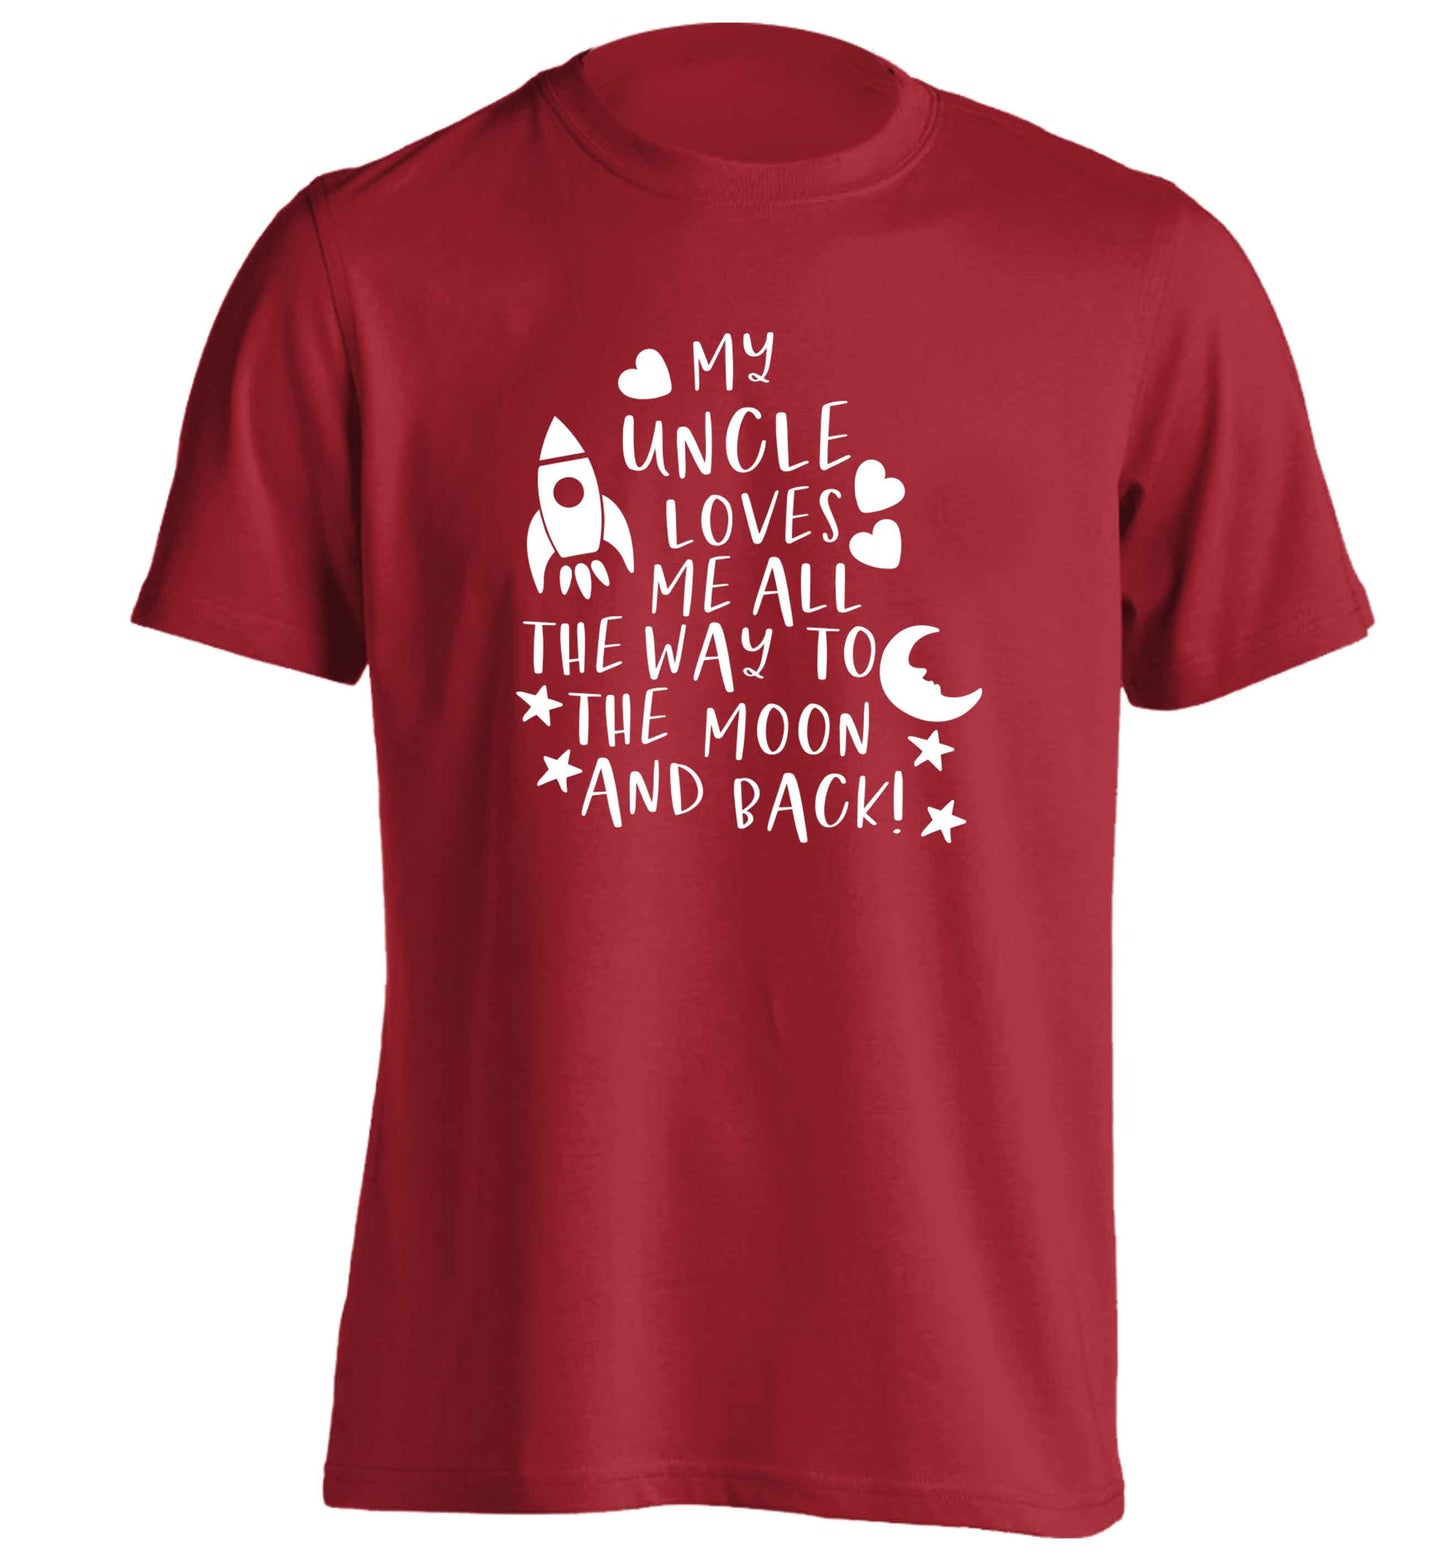 My uncle loves me all the way to the moon and back adults unisex red Tshirt 2XL